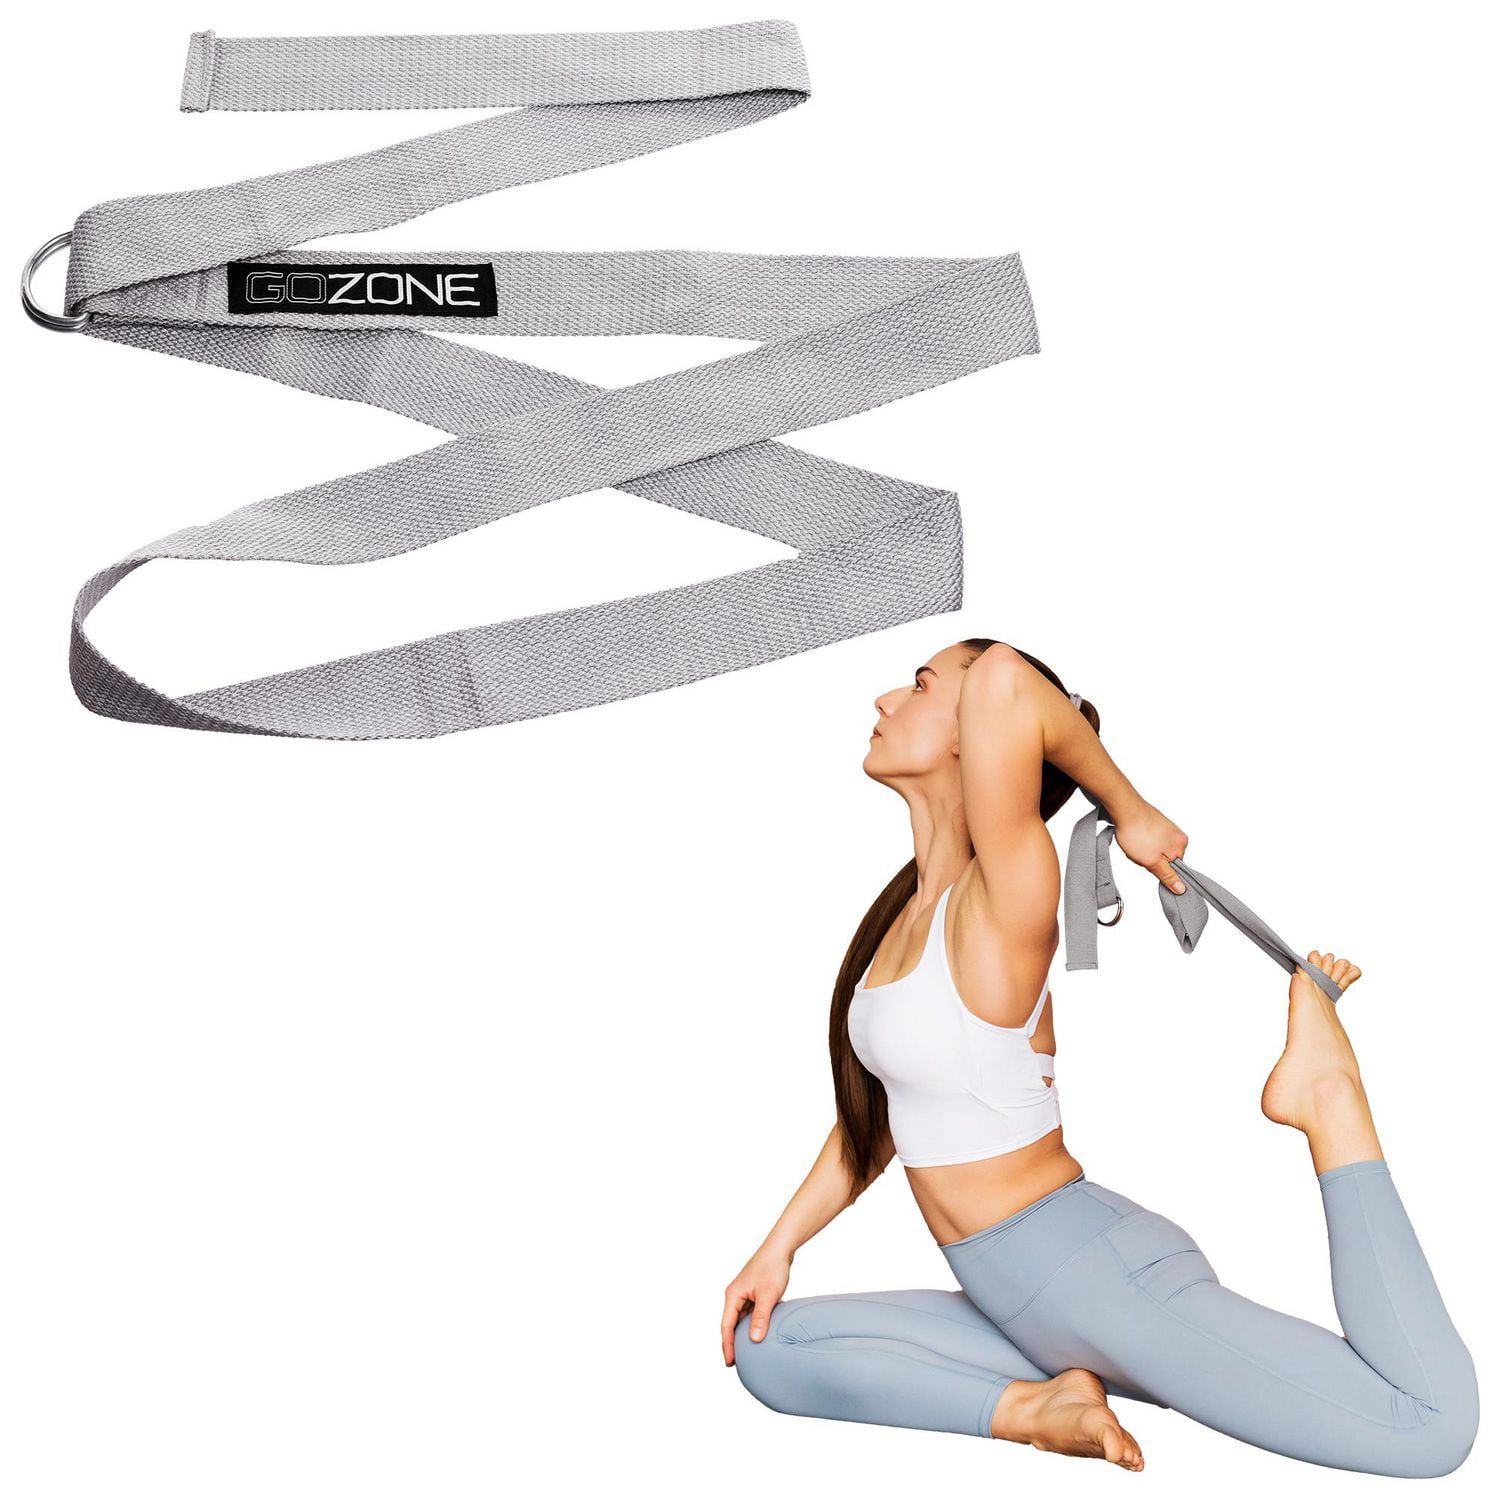 Yoga Stretch Straps for sale in Windsor, Ontario